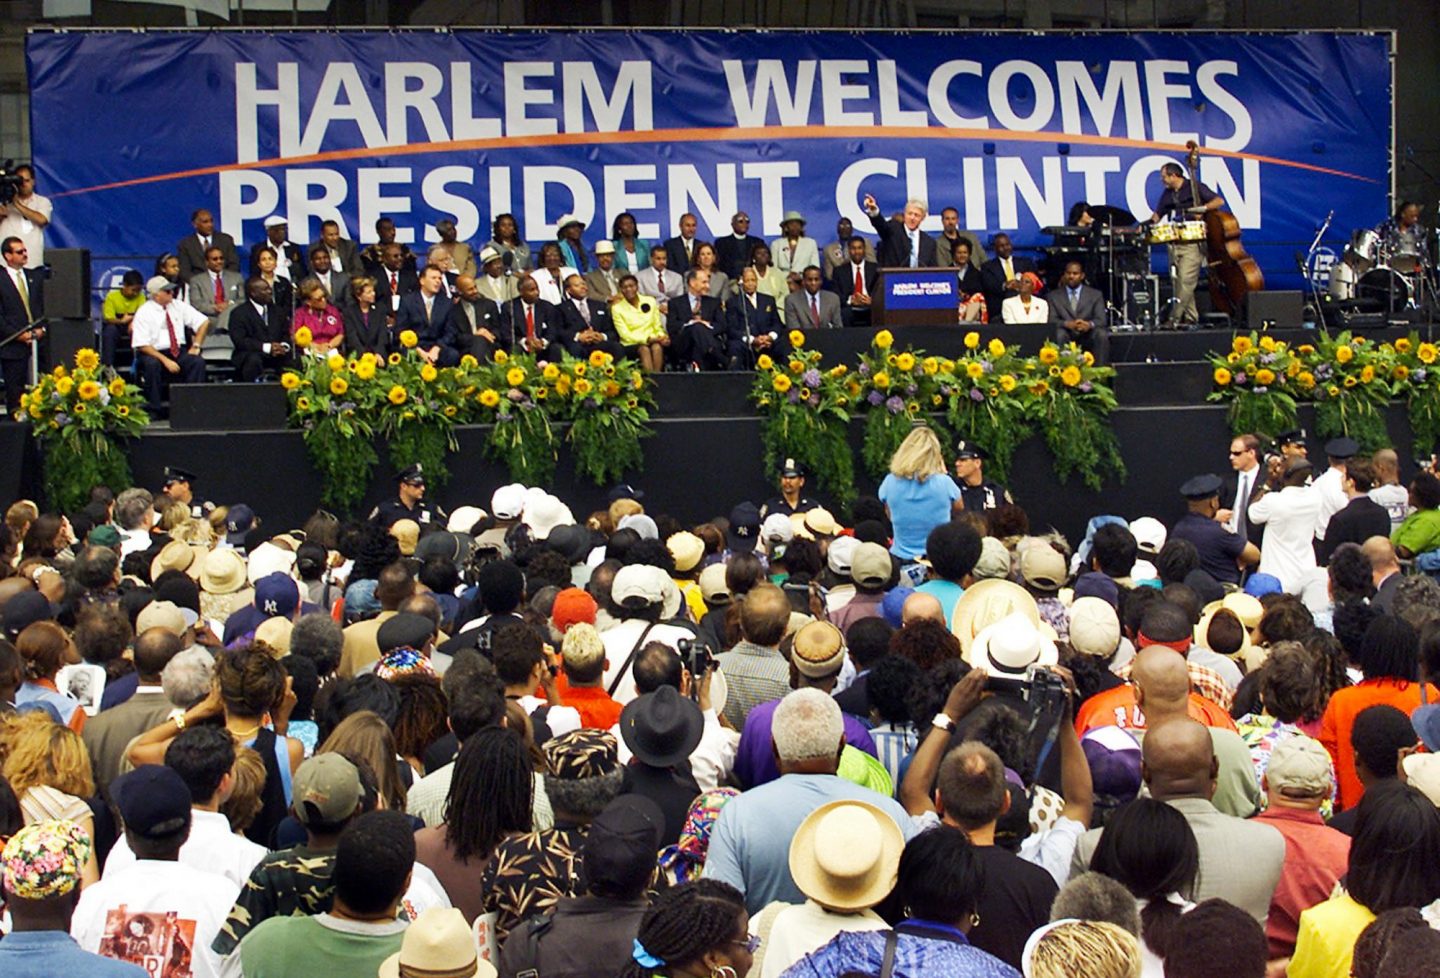 President Clinton speaks onstage in front of a large crowd. A sign behind him says: "Harlem welcomes President Clinton."